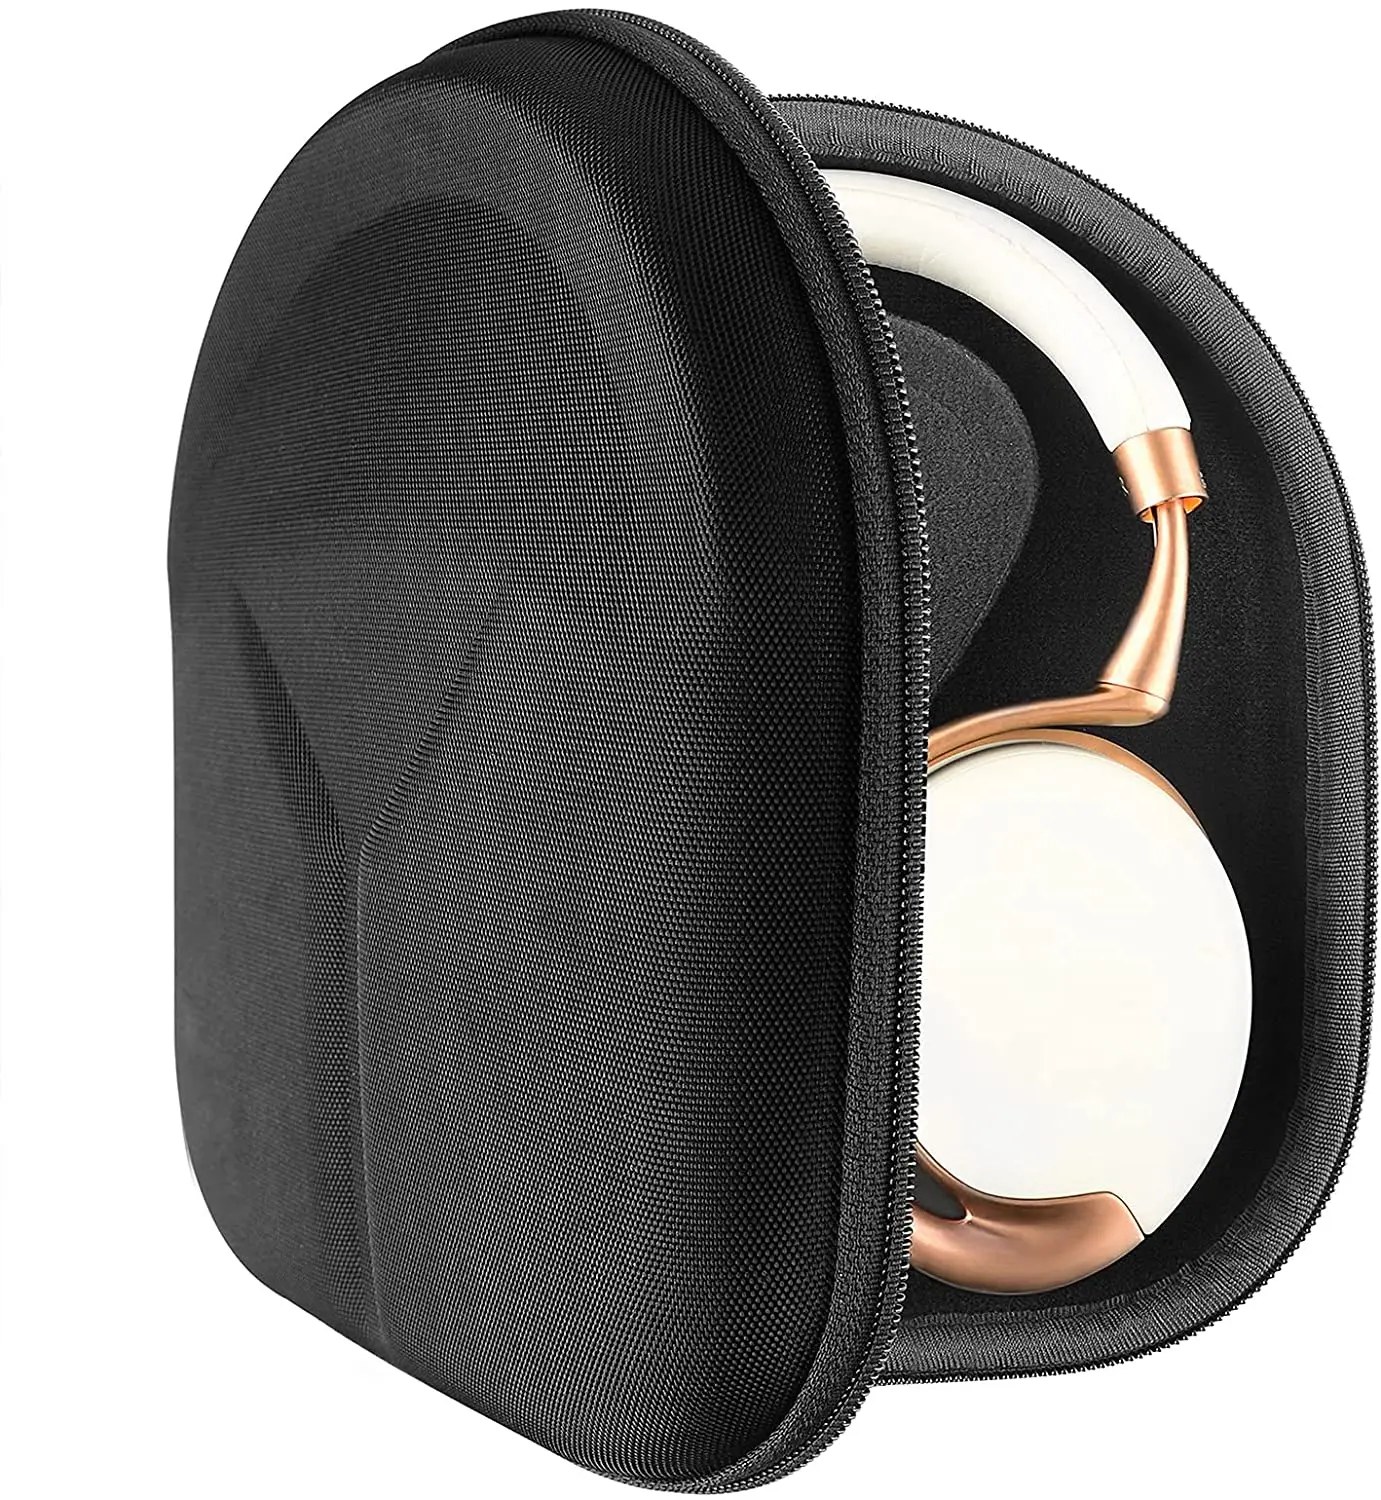 Enlarge Geekria Headphones Case For Parrot Zik, Bose QC35 ii, B&O Play  Portable Bluetooth Earphones Headset Bag for Accessories Storage